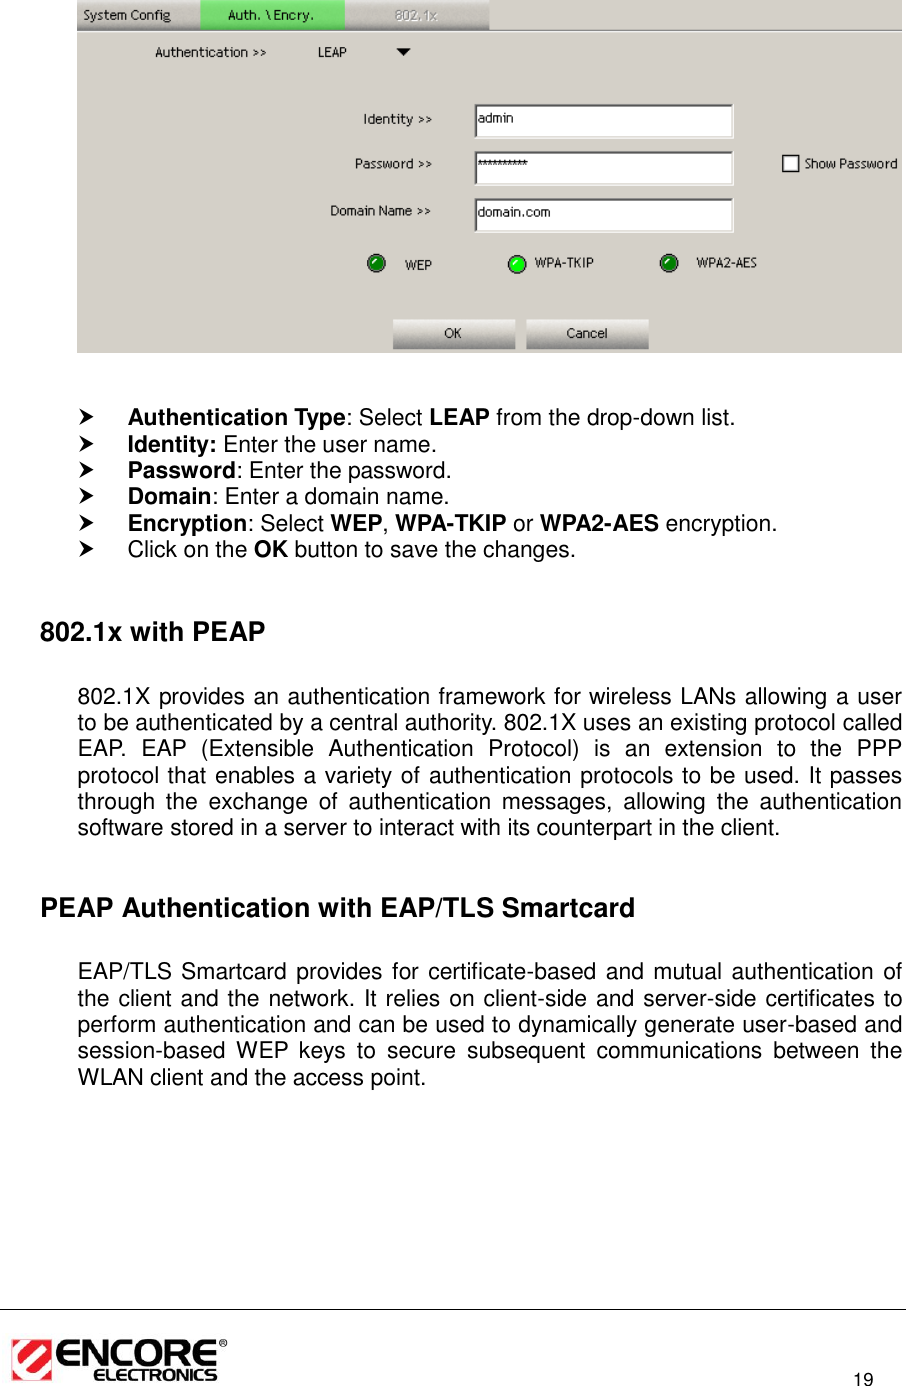                                                                                                                          19      Authentication Type: Select LEAP from the drop-down list.   Identity: Enter the user name.  Password: Enter the password.  Domain: Enter a domain name.  Encryption: Select WEP, WPA-TKIP or WPA2-AES encryption.   Click on the OK button to save the changes.    802.1x with PEAP  802.1X provides an authentication framework for wireless LANs allowing a user to be authenticated by a central authority. 802.1X uses an existing protocol called EAP.  EAP  (Extensible  Authentication  Protocol)  is  an  extension  to  the  PPP protocol that enables a variety of authentication protocols to be used. It passes through  the  exchange  of  authentication  messages,  allowing  the  authentication software stored in a server to interact with its counterpart in the client.    PEAP Authentication with EAP/TLS Smartcard  EAP/TLS Smartcard provides for certificate-based and mutual authentication of the client and the network. It relies on client-side and server-side certificates to perform authentication and can be used to dynamically generate user-based and session-based  WEP  keys  to  secure  subsequent  communications  between  the WLAN client and the access point.  